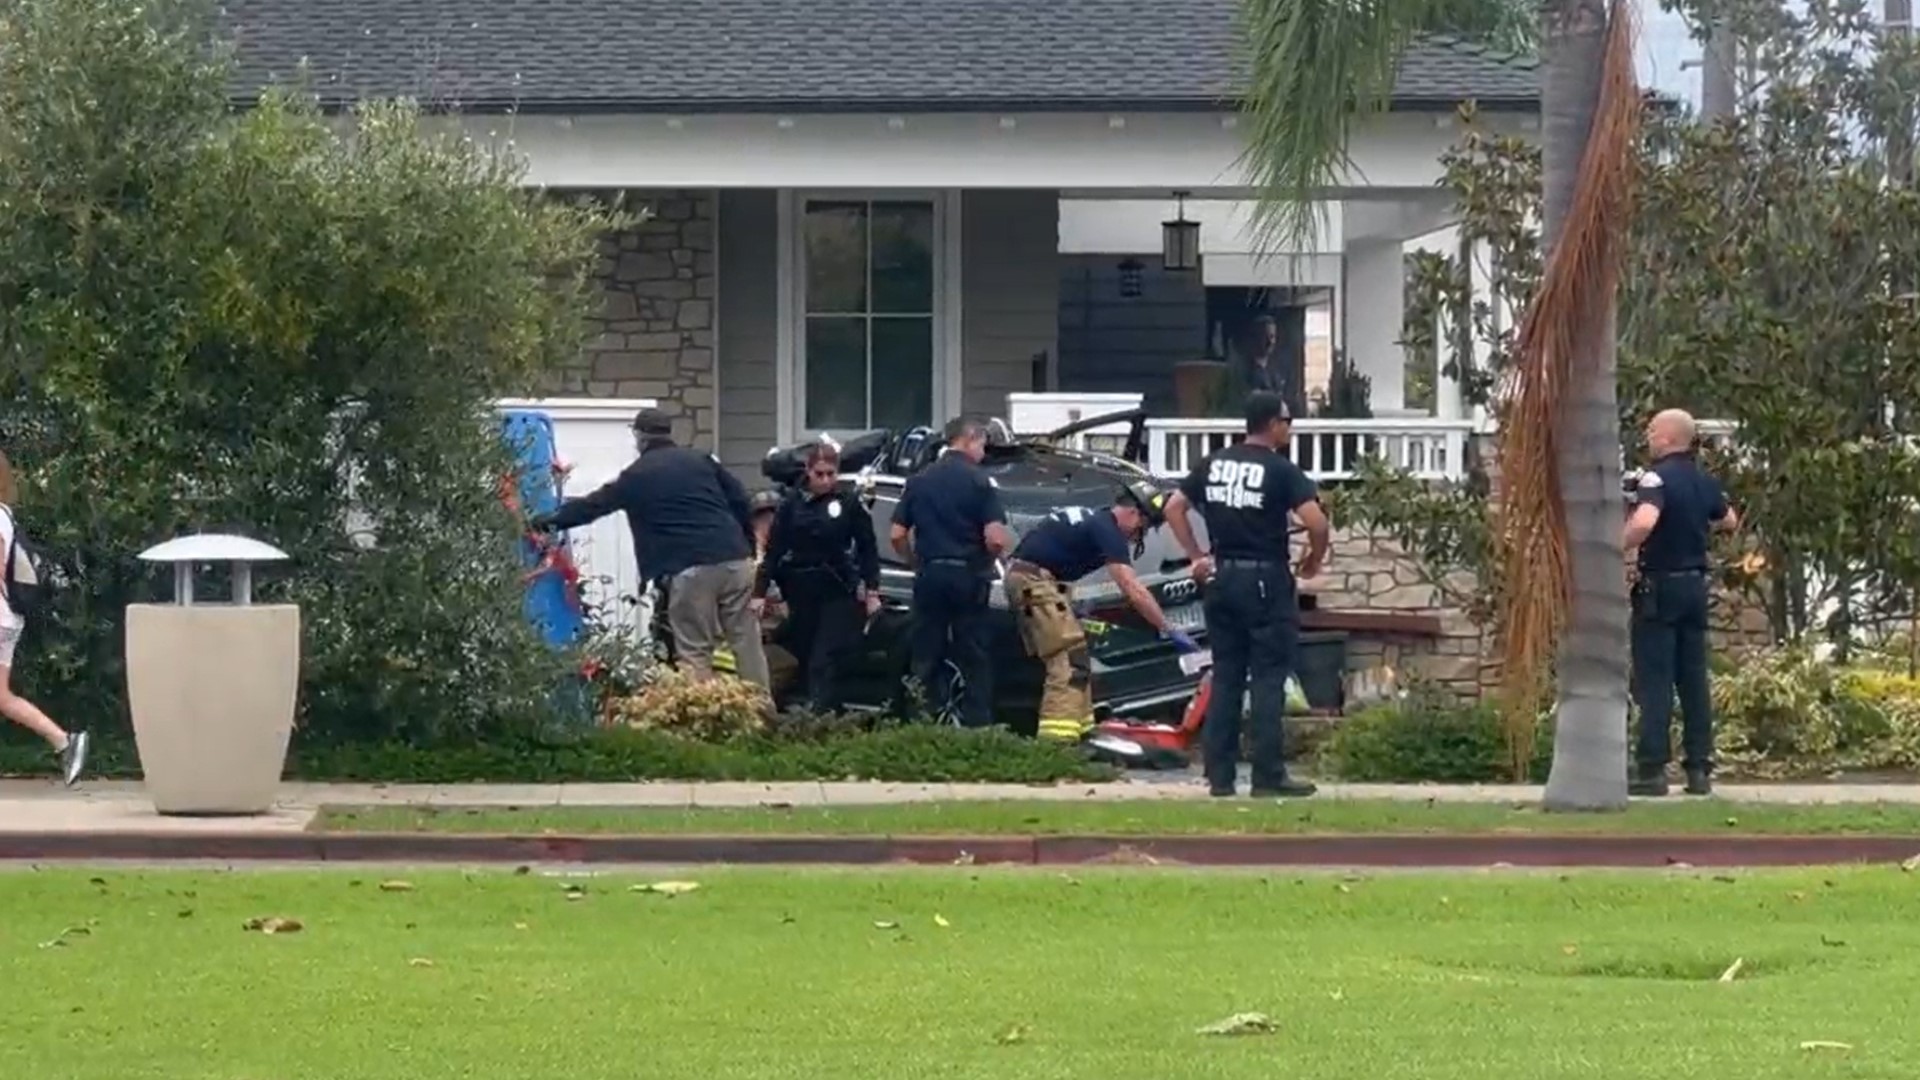 An Audi SUV that crashed into a Coronado home sent at least one person to an area hospital in unknown condition.